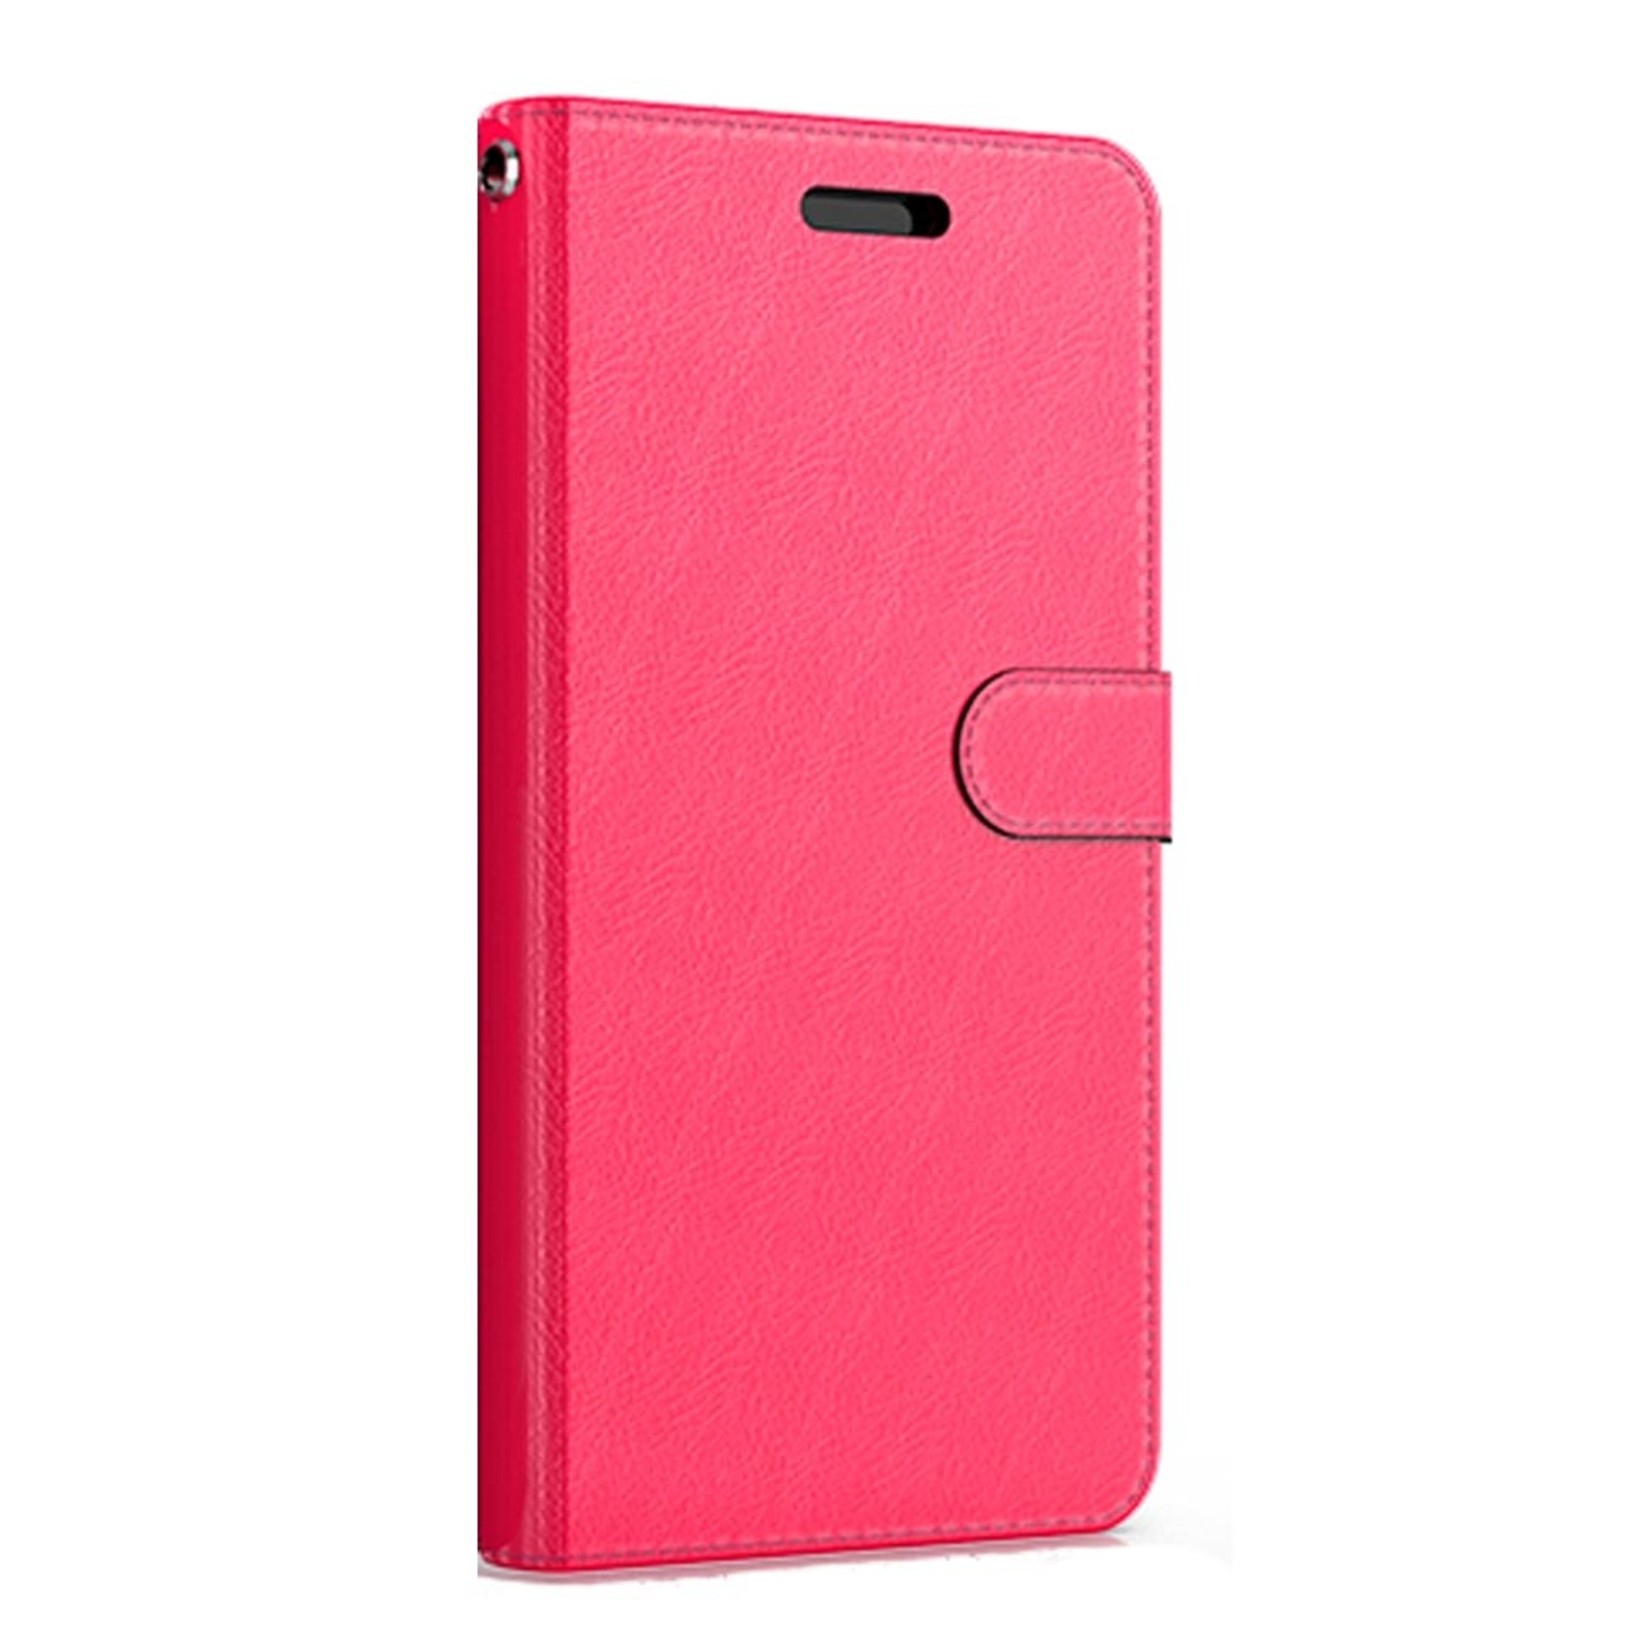 Hybrid PU Leather Flip Cover Case Wallet with Credit Card Slots for Galaxy A51 5G